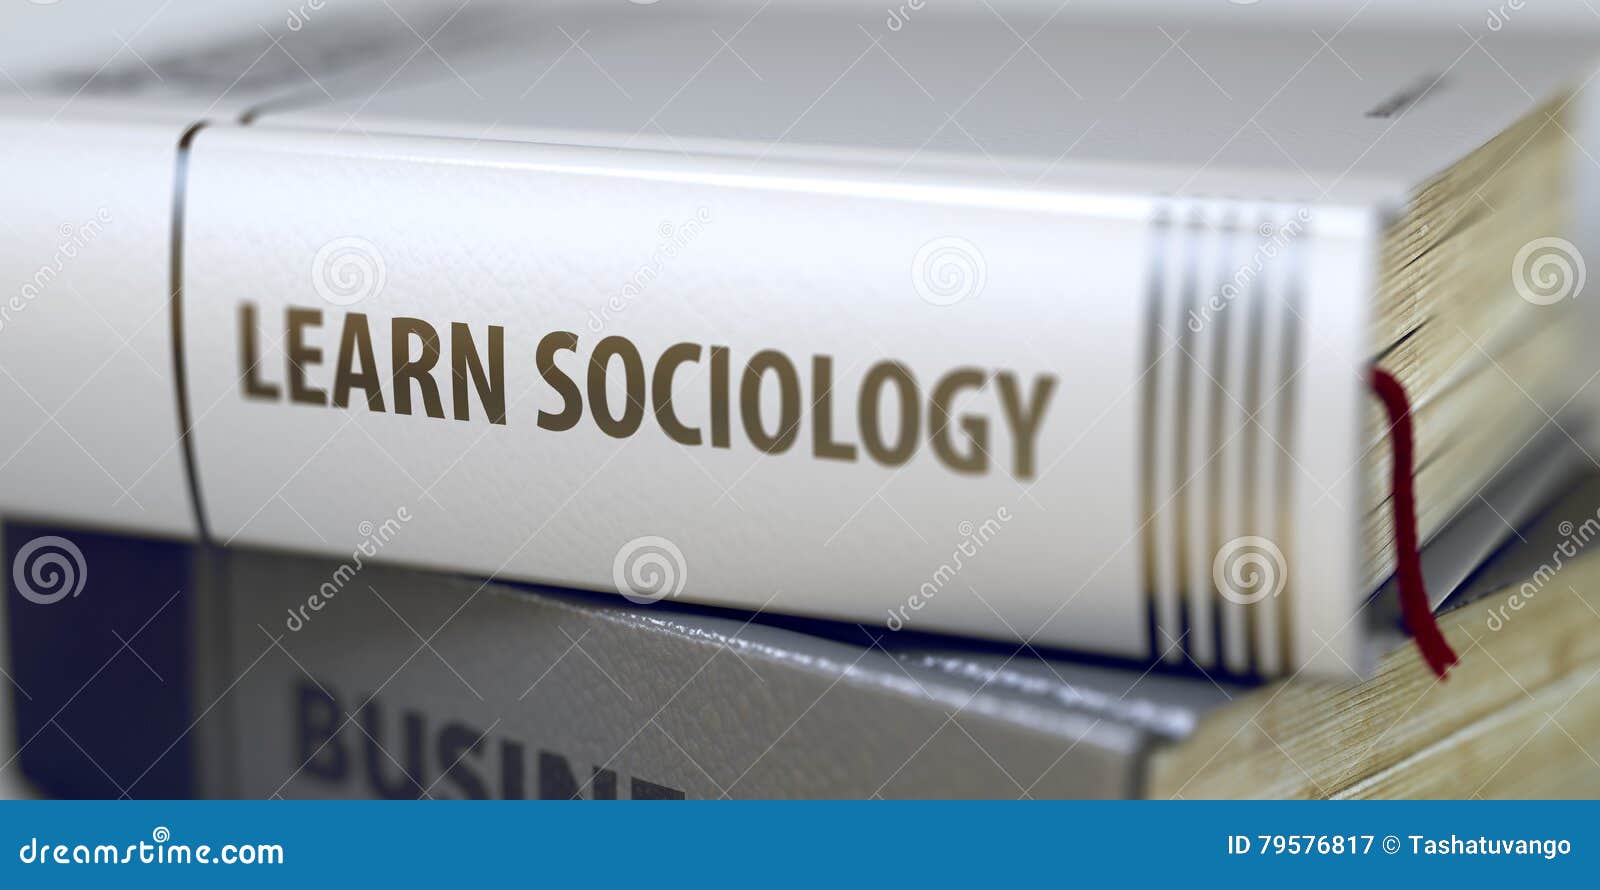 learn sociology - business book title. 3d.